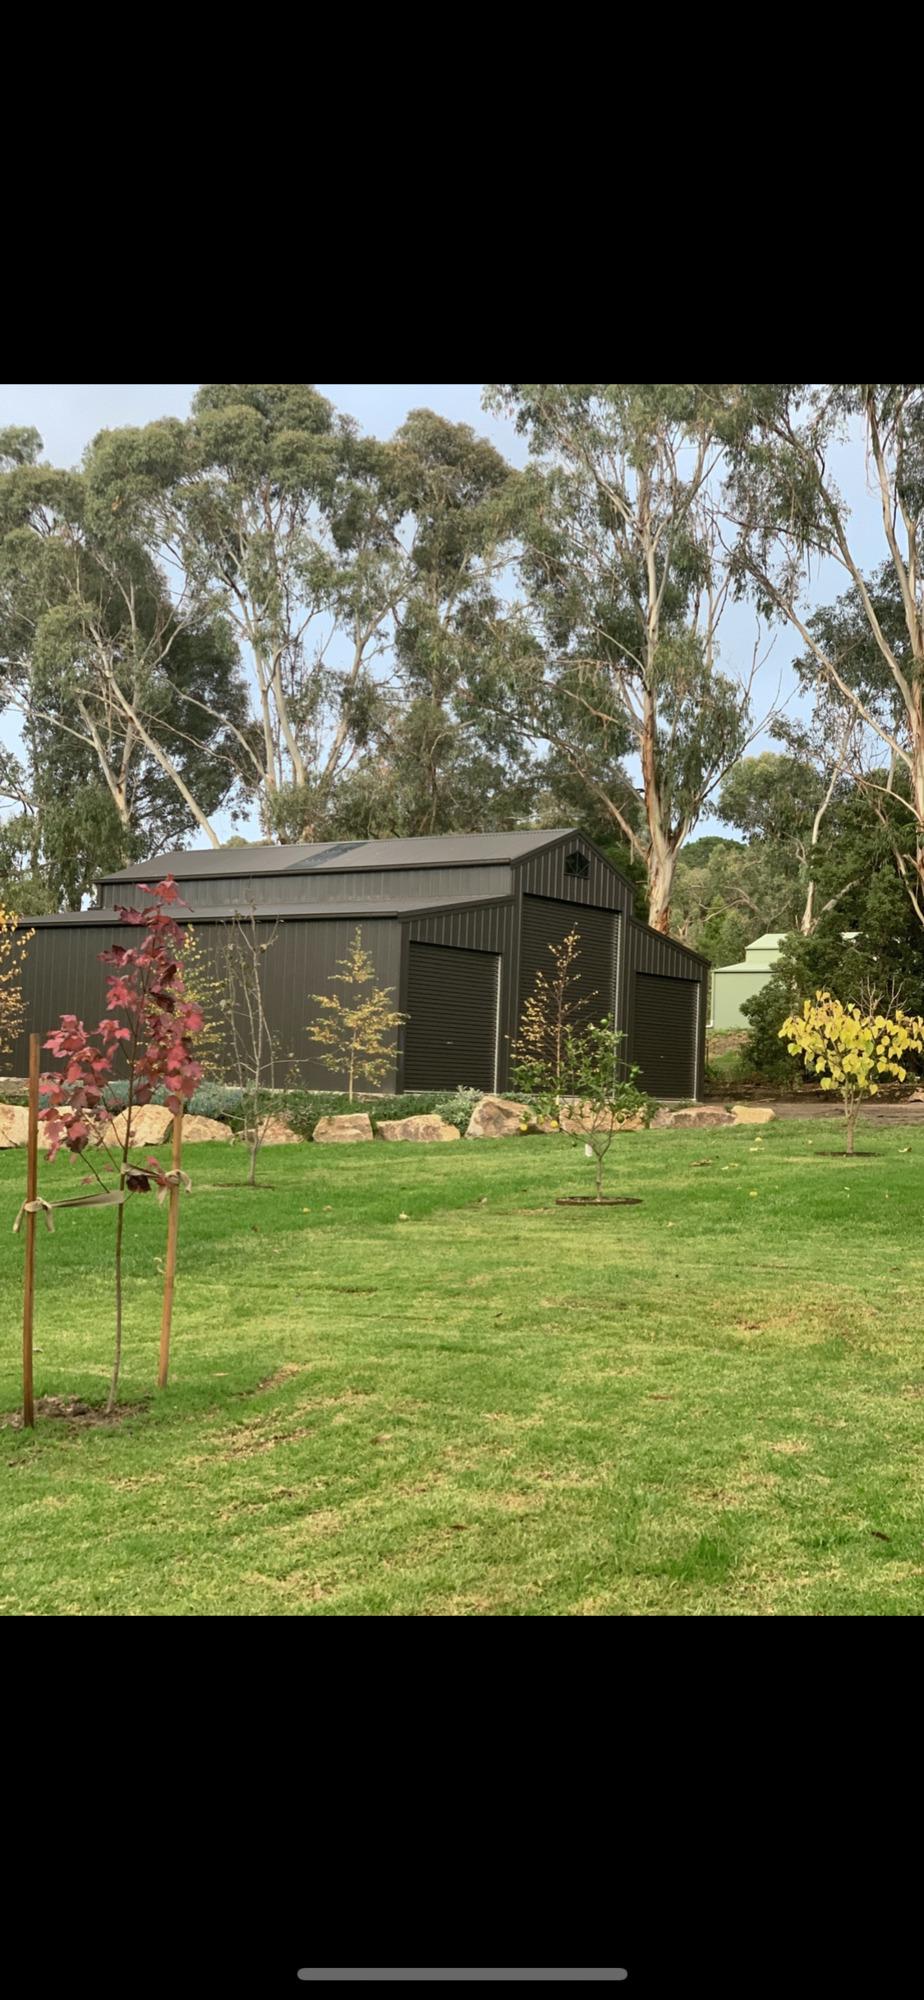 Rebecca from Tyabb, VIC loves COLORBOND® steel. Roofing, Guttering & Fascia, Garage Doors, Sheds made from COLORBOND® steel in colour Monument®